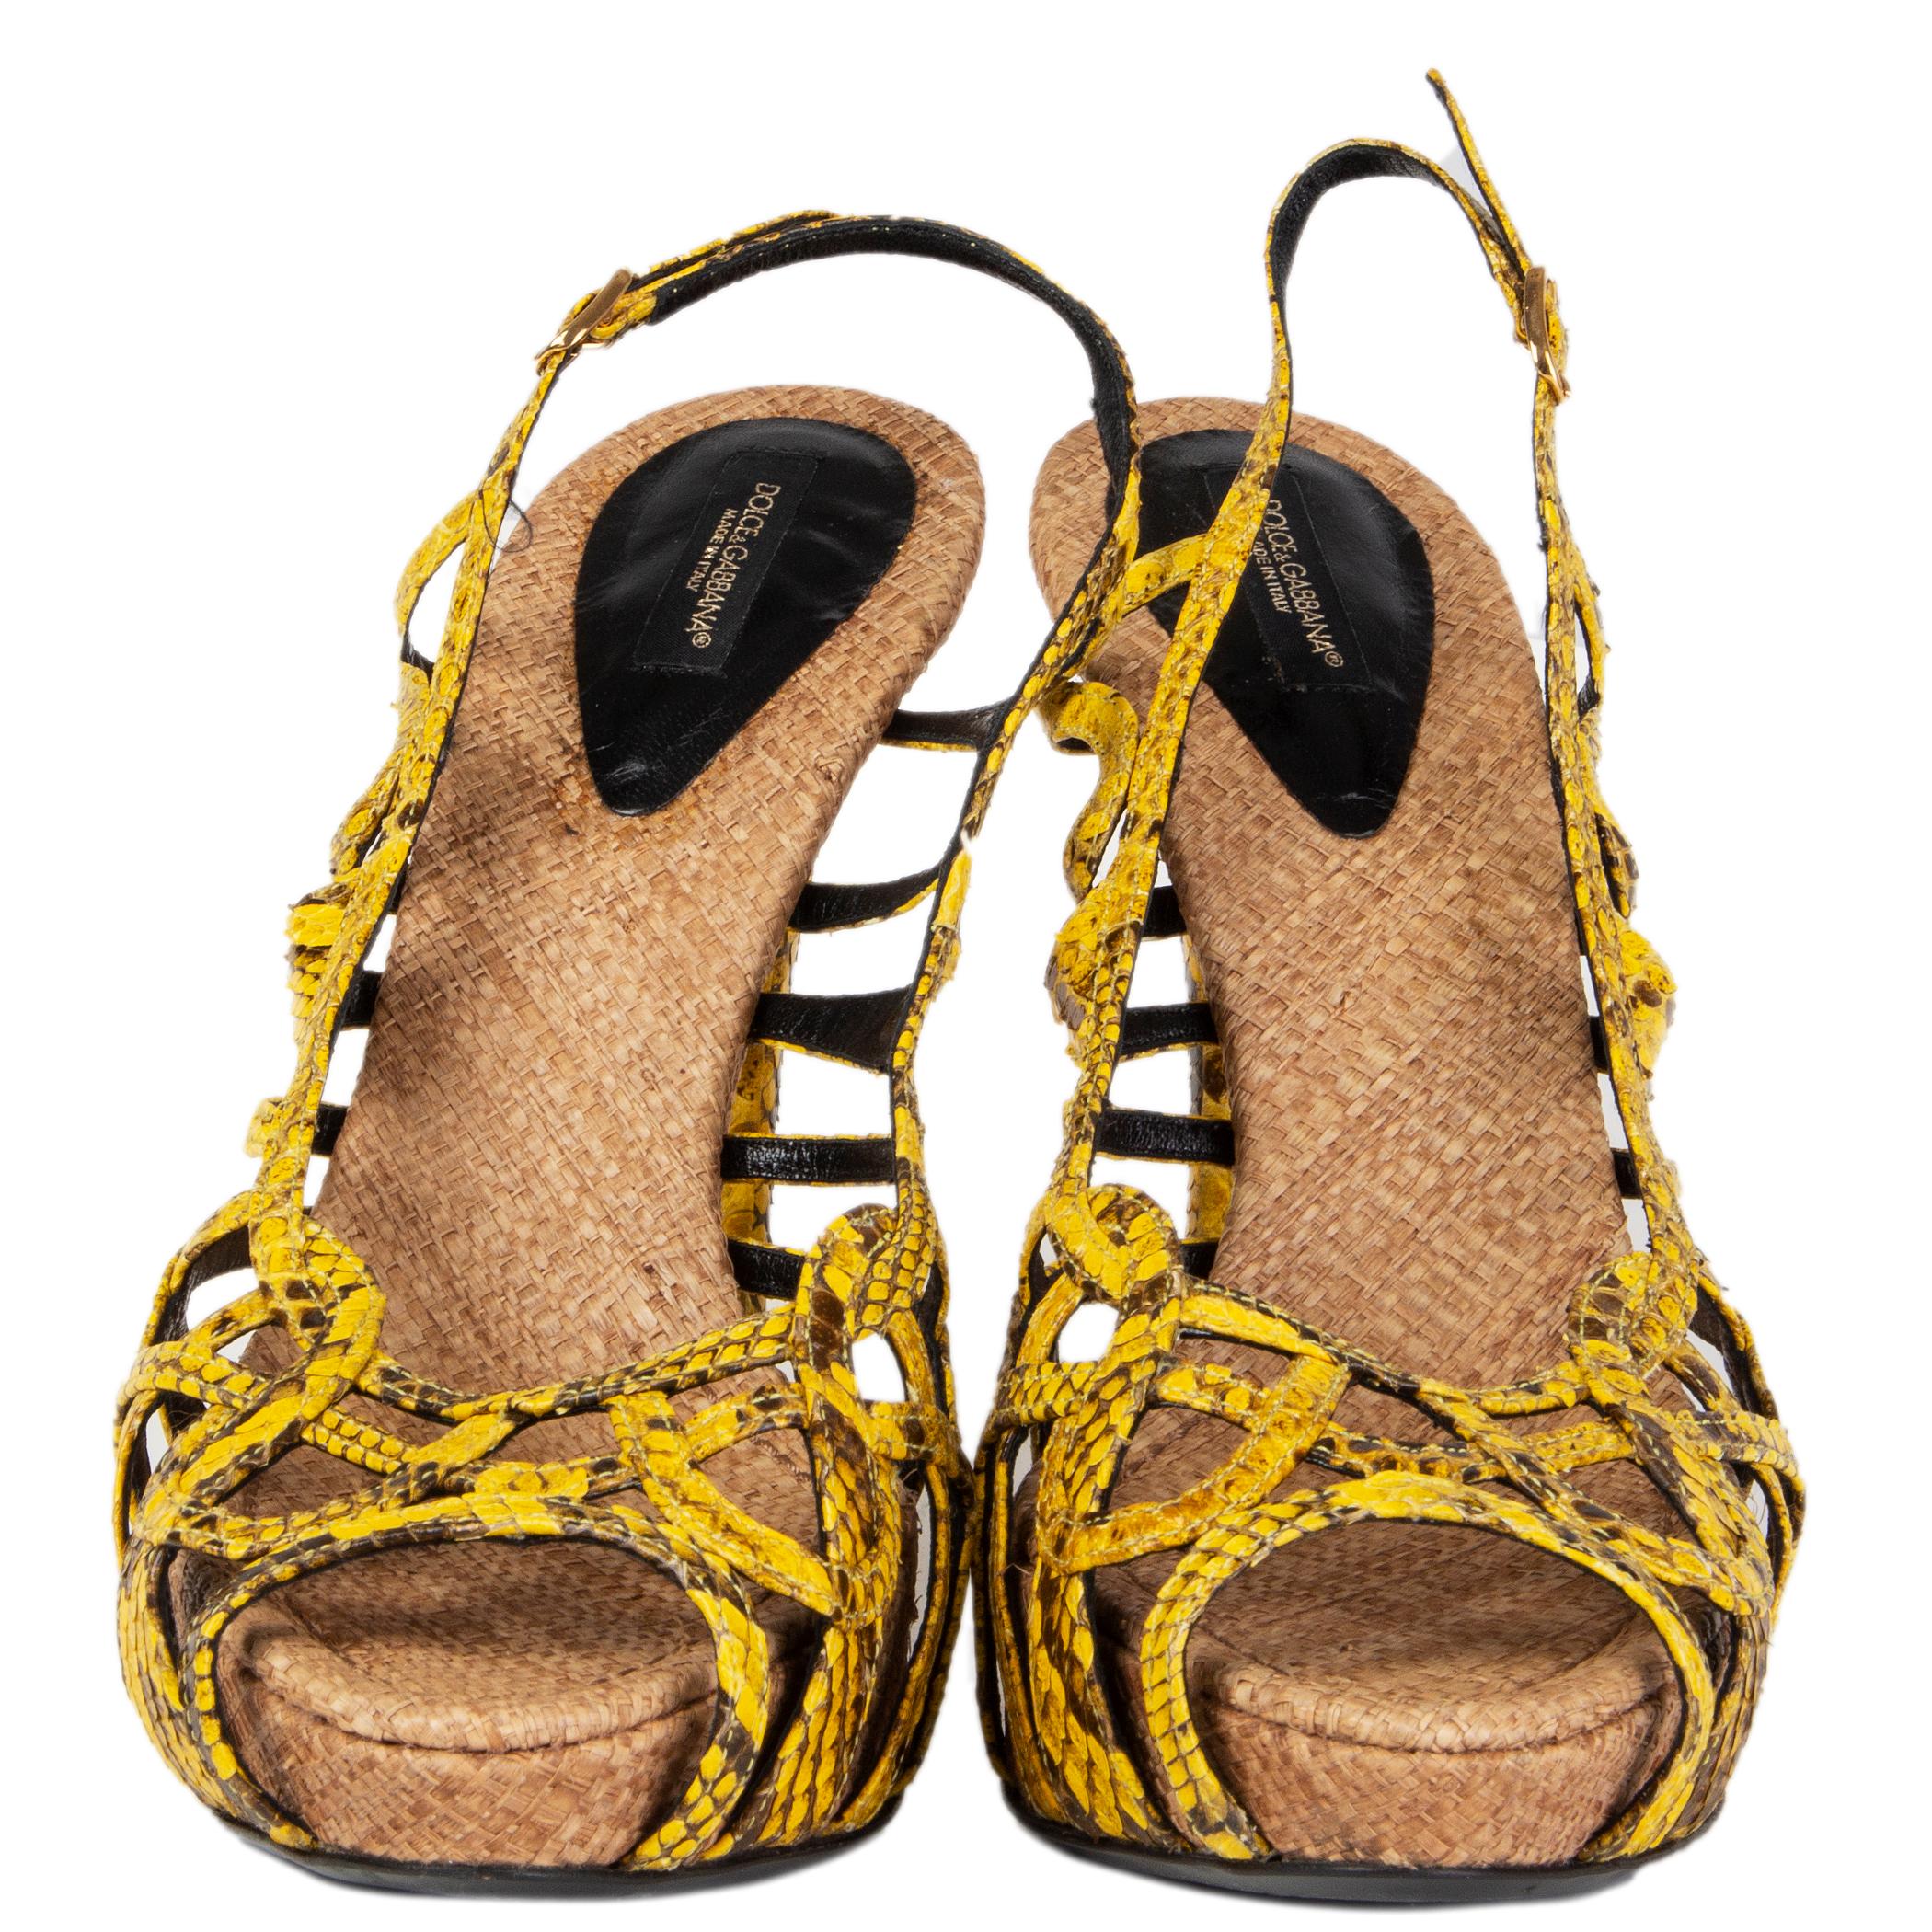 100% authentic Dolce & Gabbana strappy sandals in yellow dark brown snakeskin and woven raffia platform sole. Have been worn and are in excellent condition. 

Measurements
Imprinted Size	39.5
Shoe Size	39.5
Inside Sole	25.5cm (9.9in)
Width	7.5cm